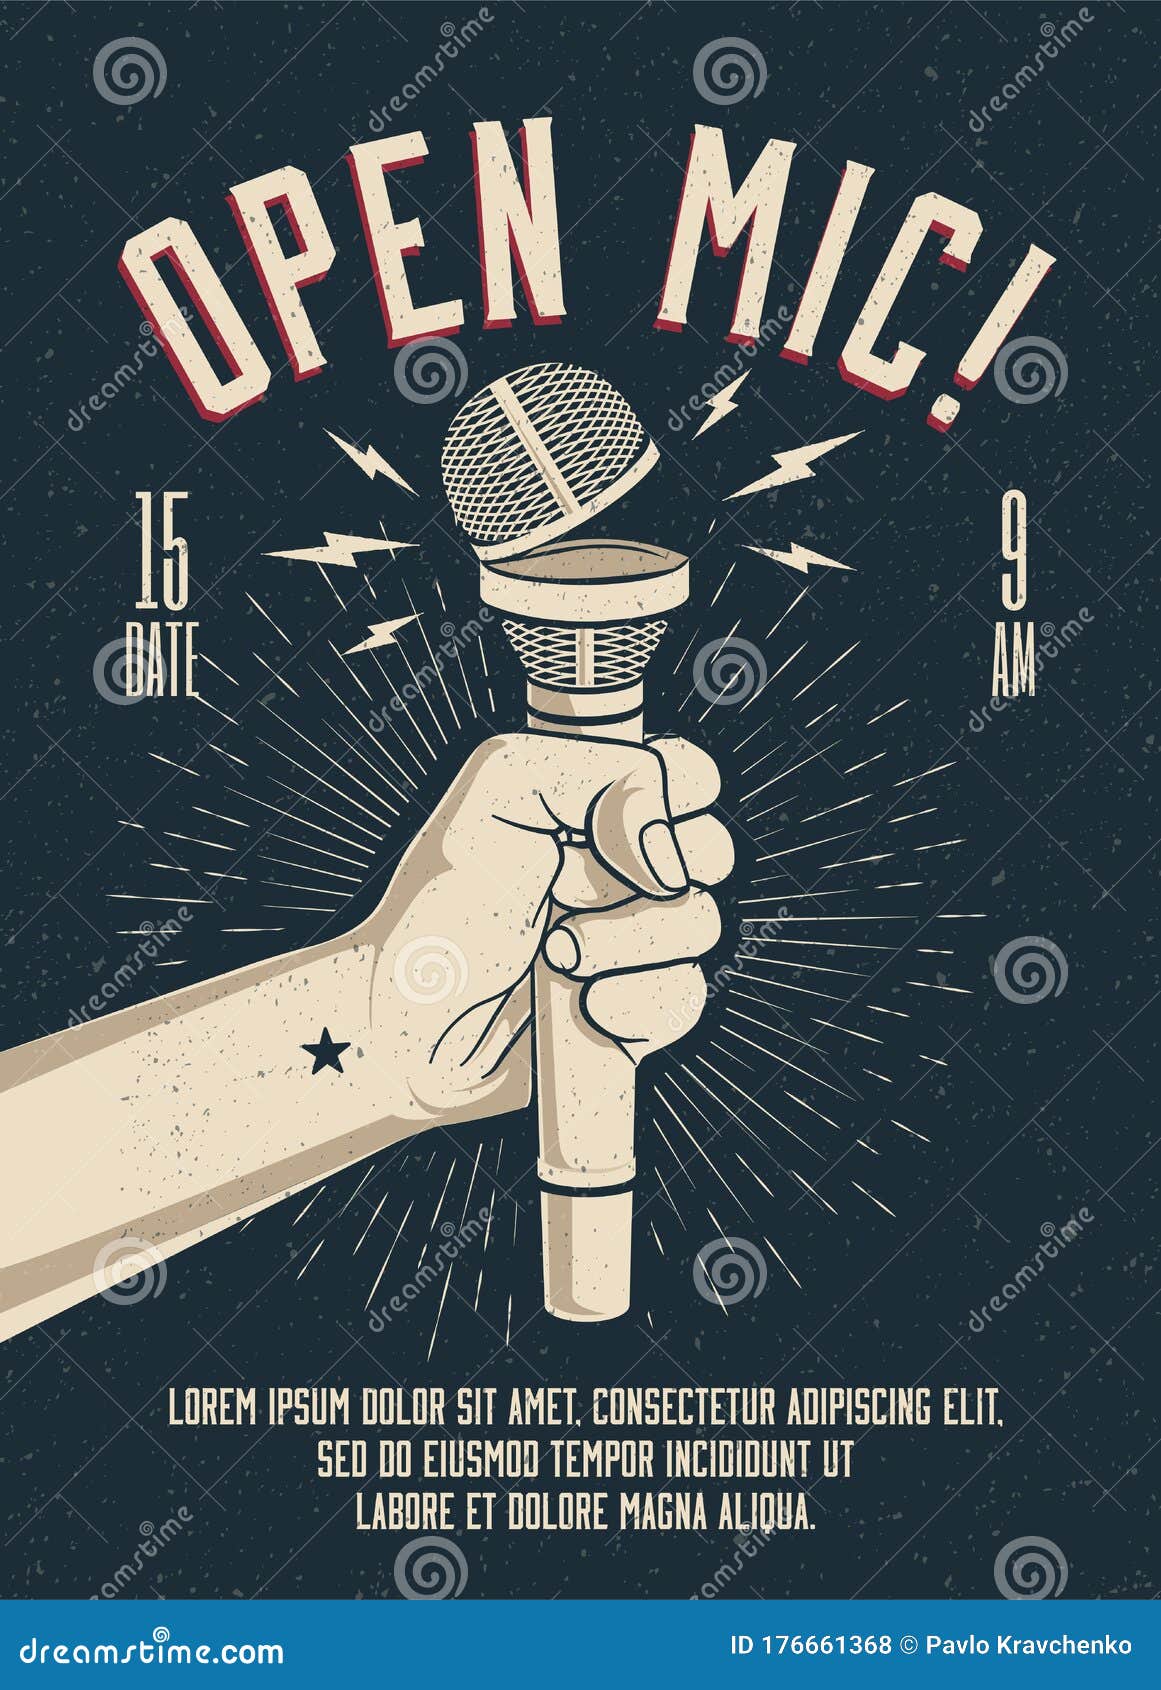 Open Microphone Event Party Session Poster Flyer Template Vintage Styled Vector Illustration Stock Illustration Illustration Of Party Live 176661368